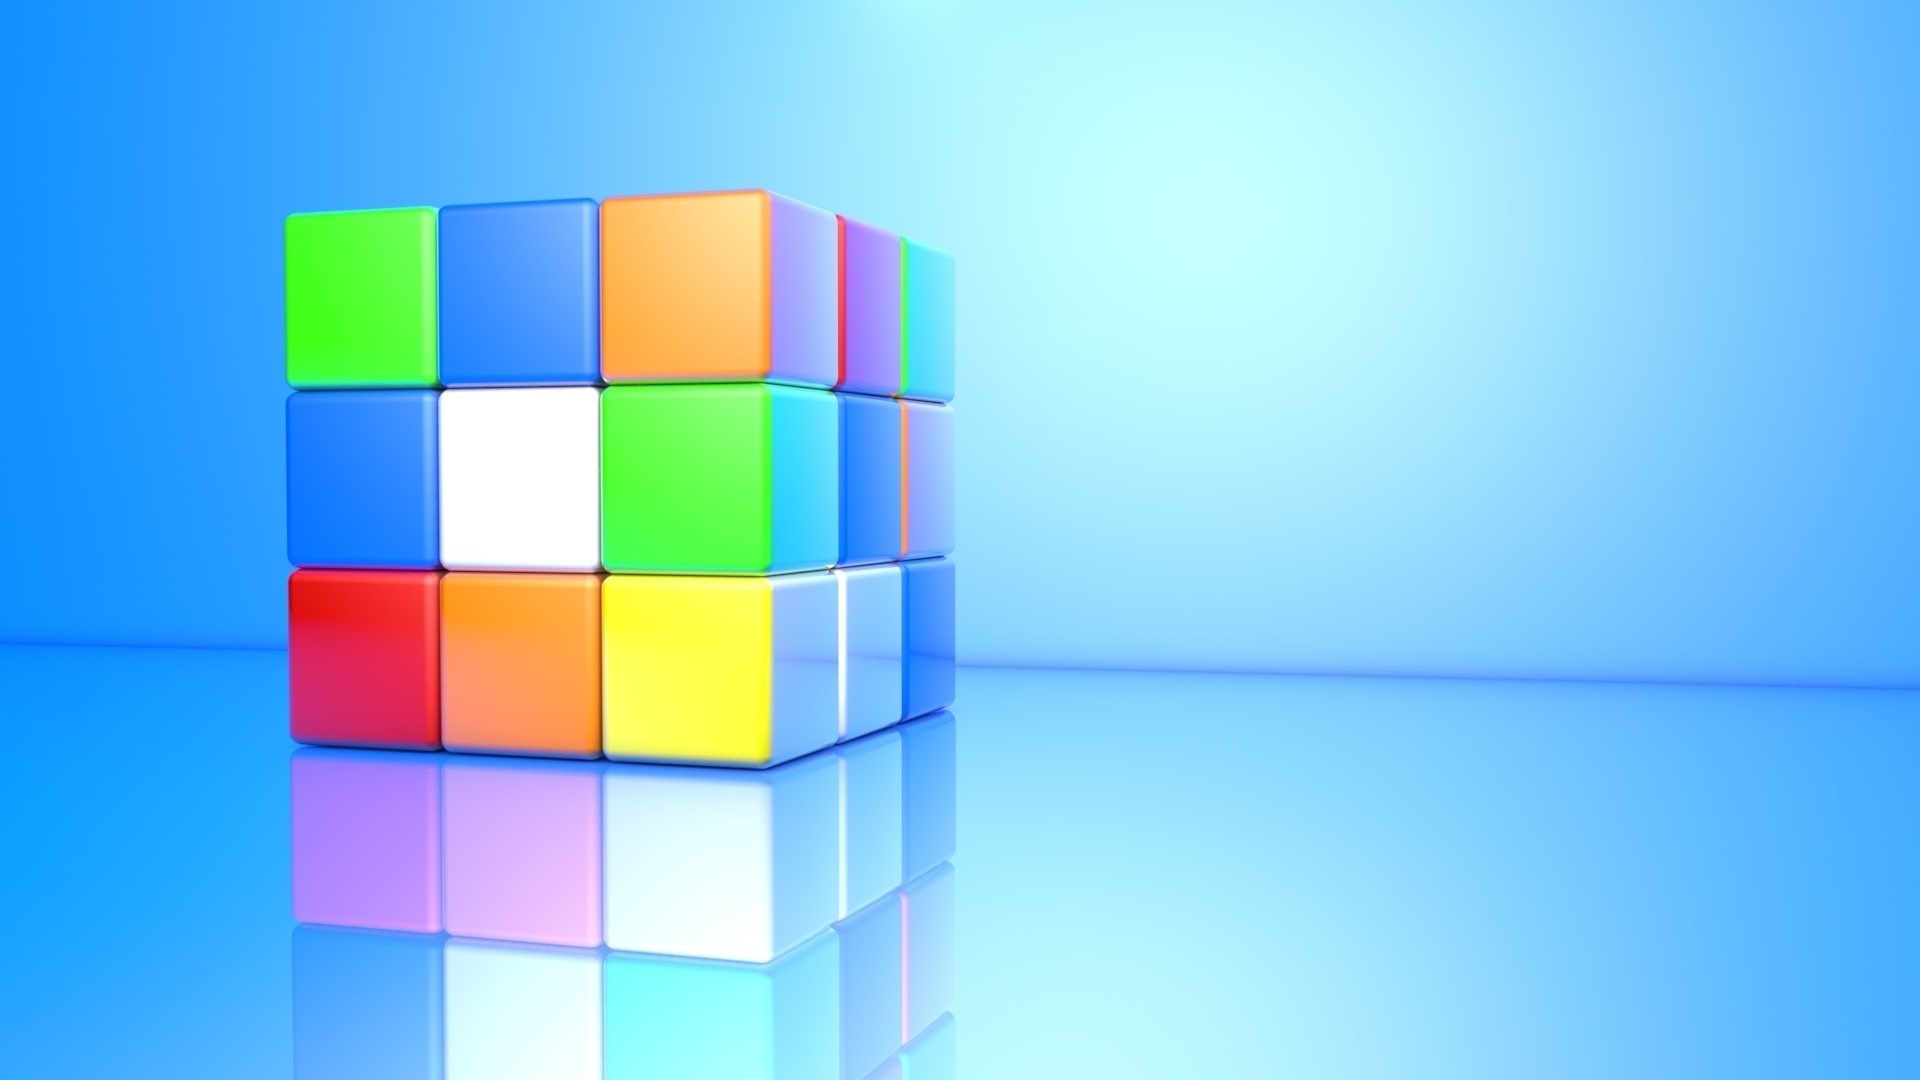 Wallpaper 3d Cube, Colorful Colors - Quotes On Rubik's Cube - HD Wallpaper 